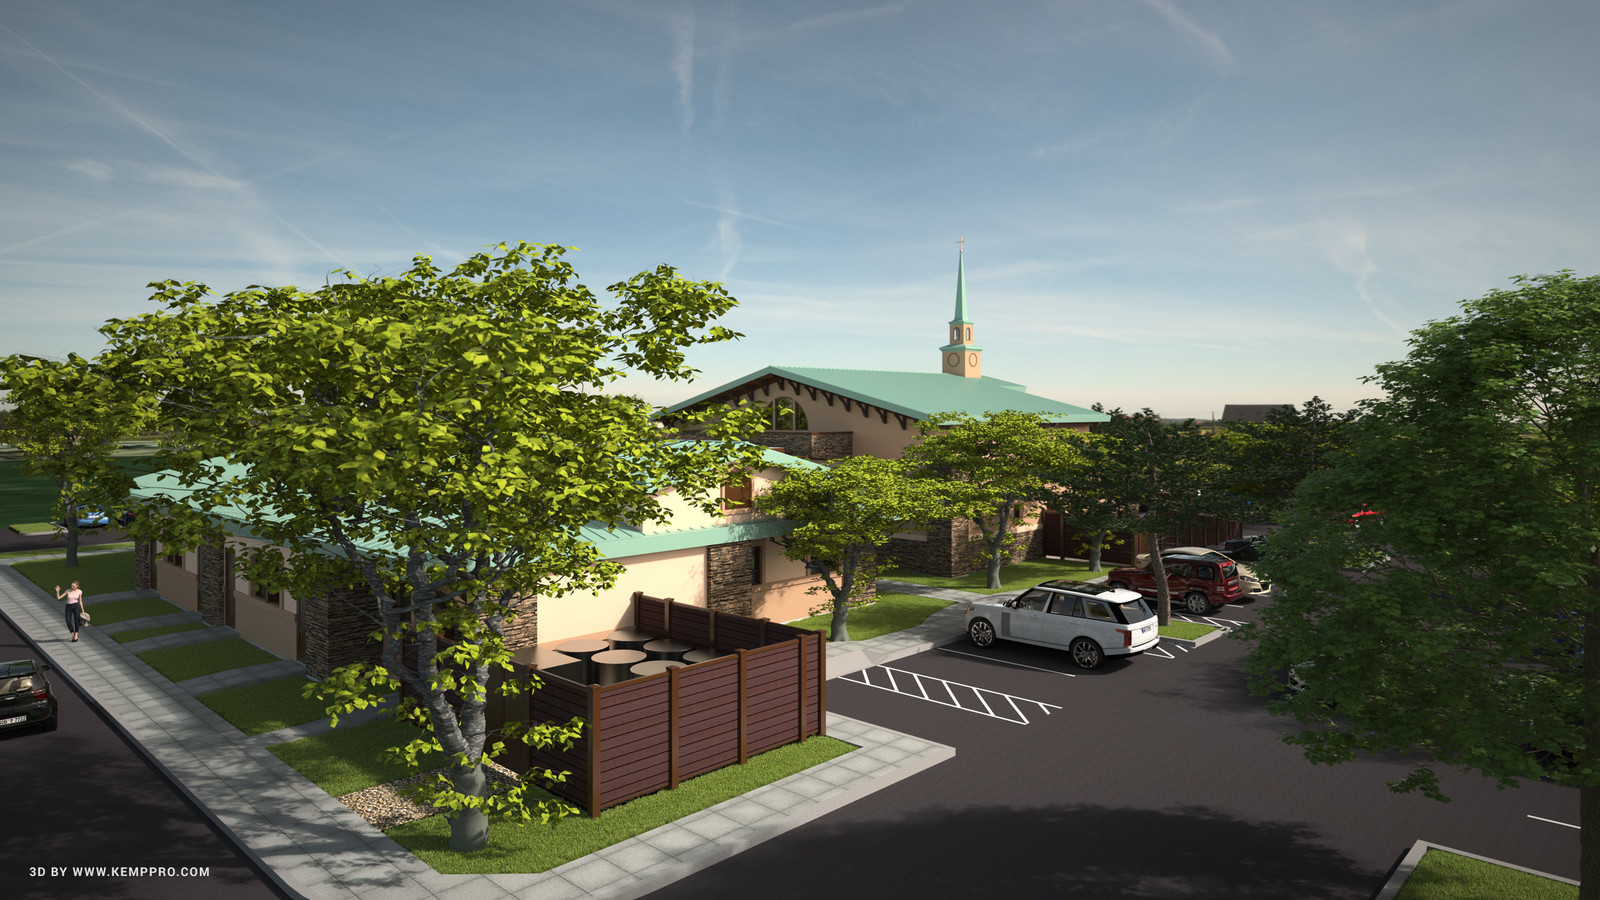 #SketchUp 2017 + #TheaRender 
HFAC-CUP-Final-2nd-sky-Persp-SW-Opt2-DK_CK

The Holy Family Catholic Church, American Canyon, CA. Project

Architect: Liturgical Environs PC

HDR by HDRI-SKIES​ found here: http://hdri-skies.com/shop/hdri-sky-300/